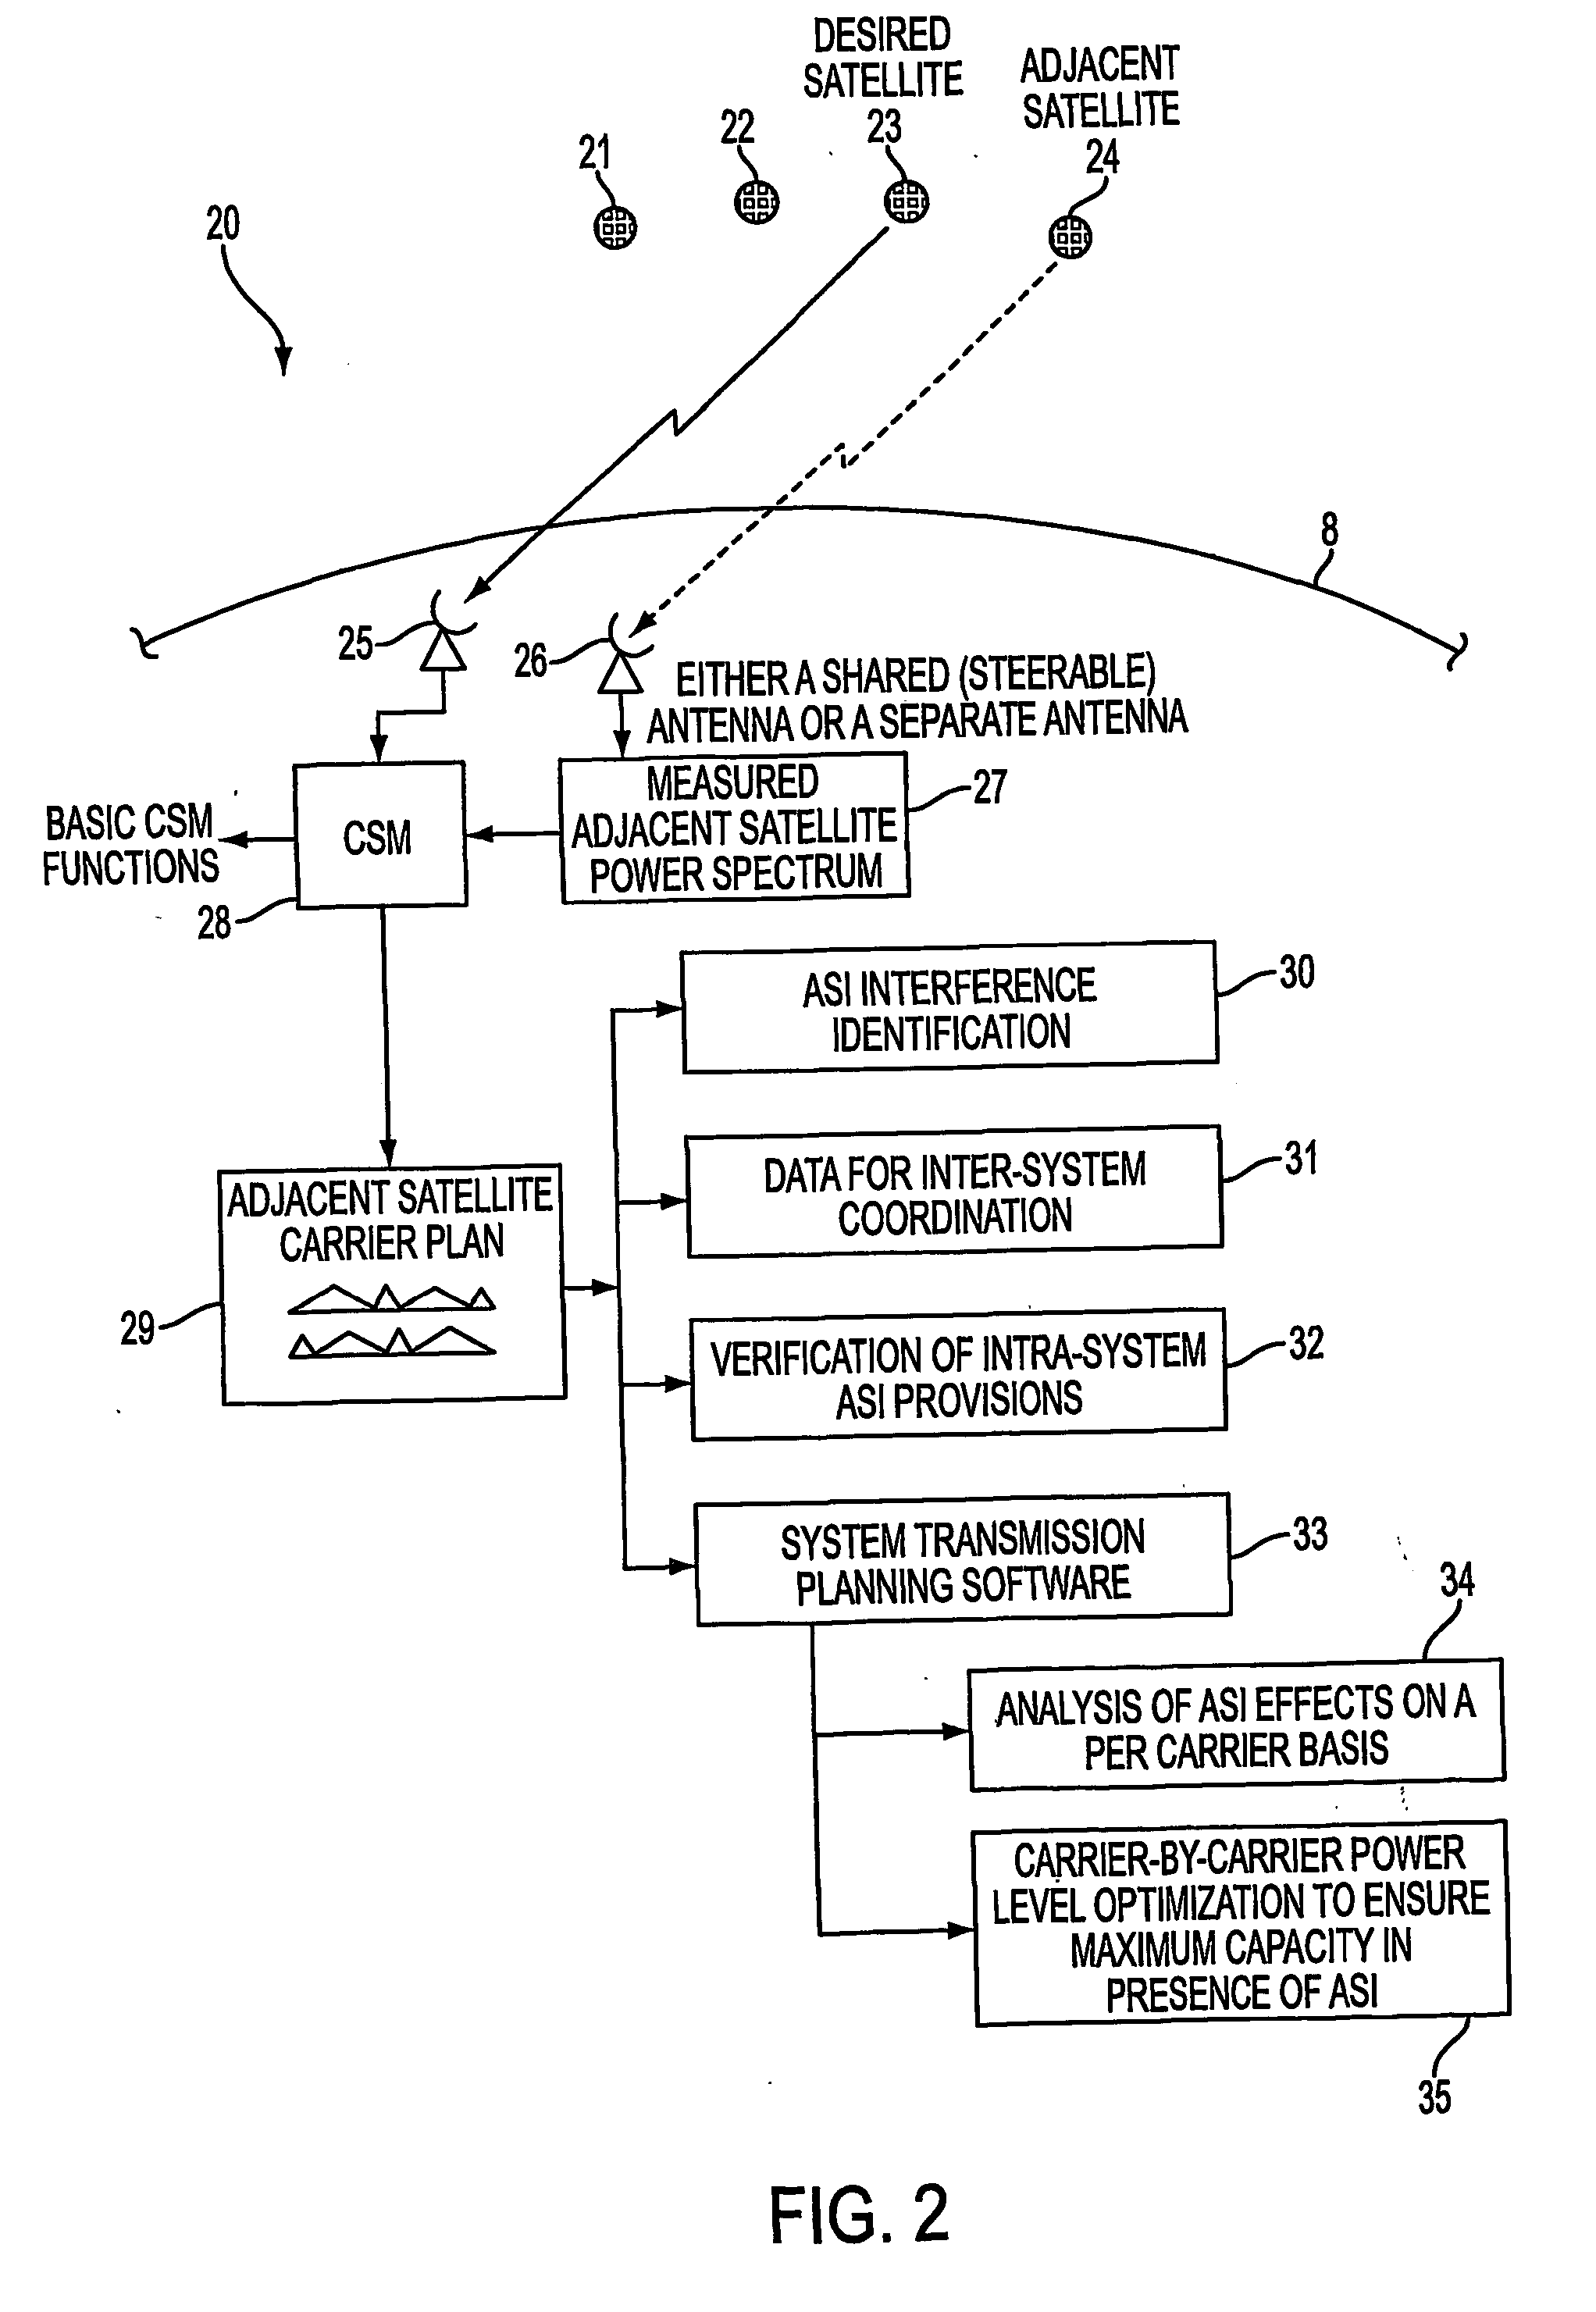 Method and apparatus for measuring adjacent satellite interference